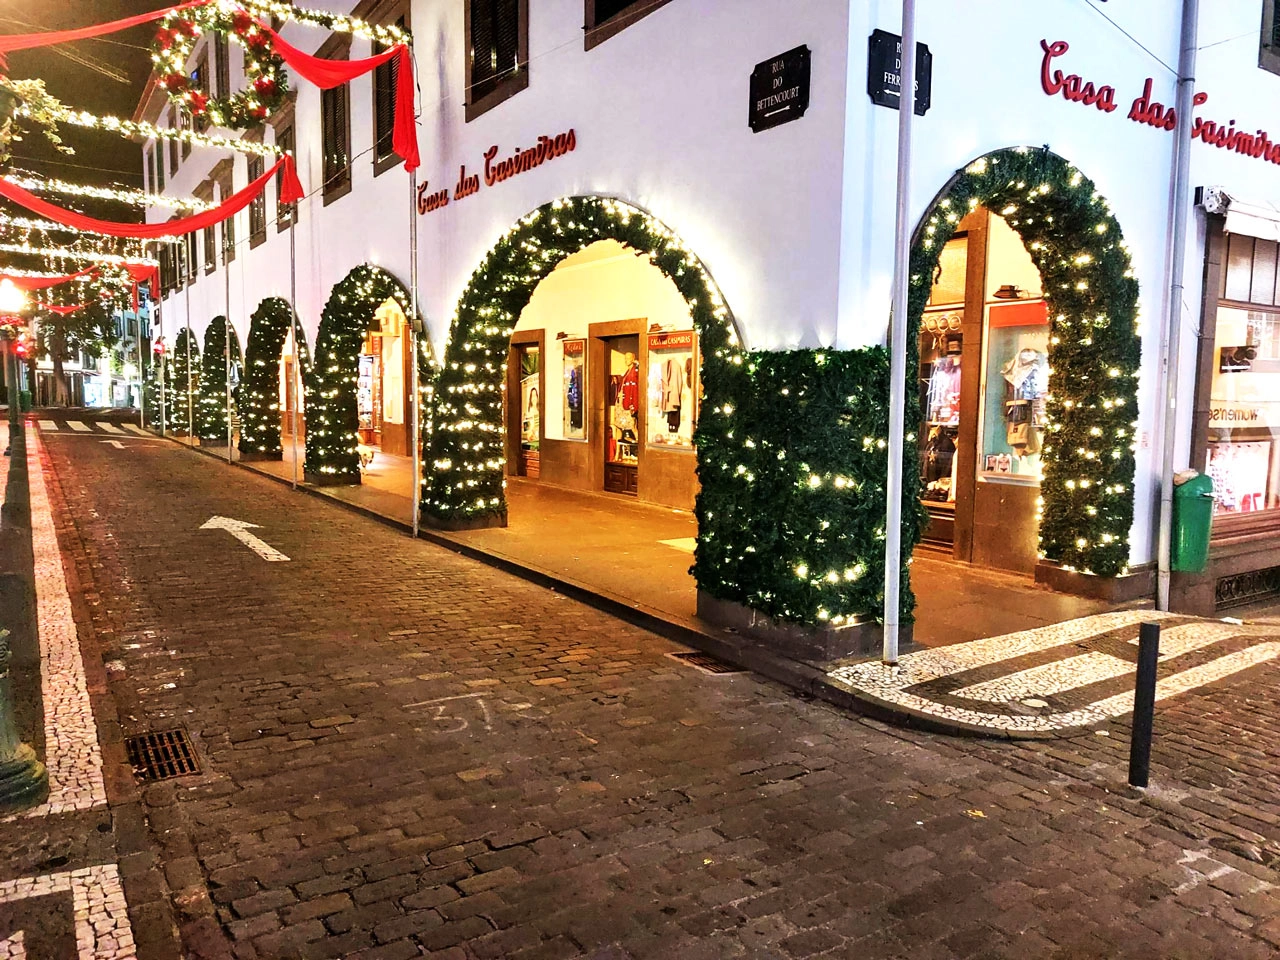 Madeira Voted as One of the Best Christmas Markets in Europe!